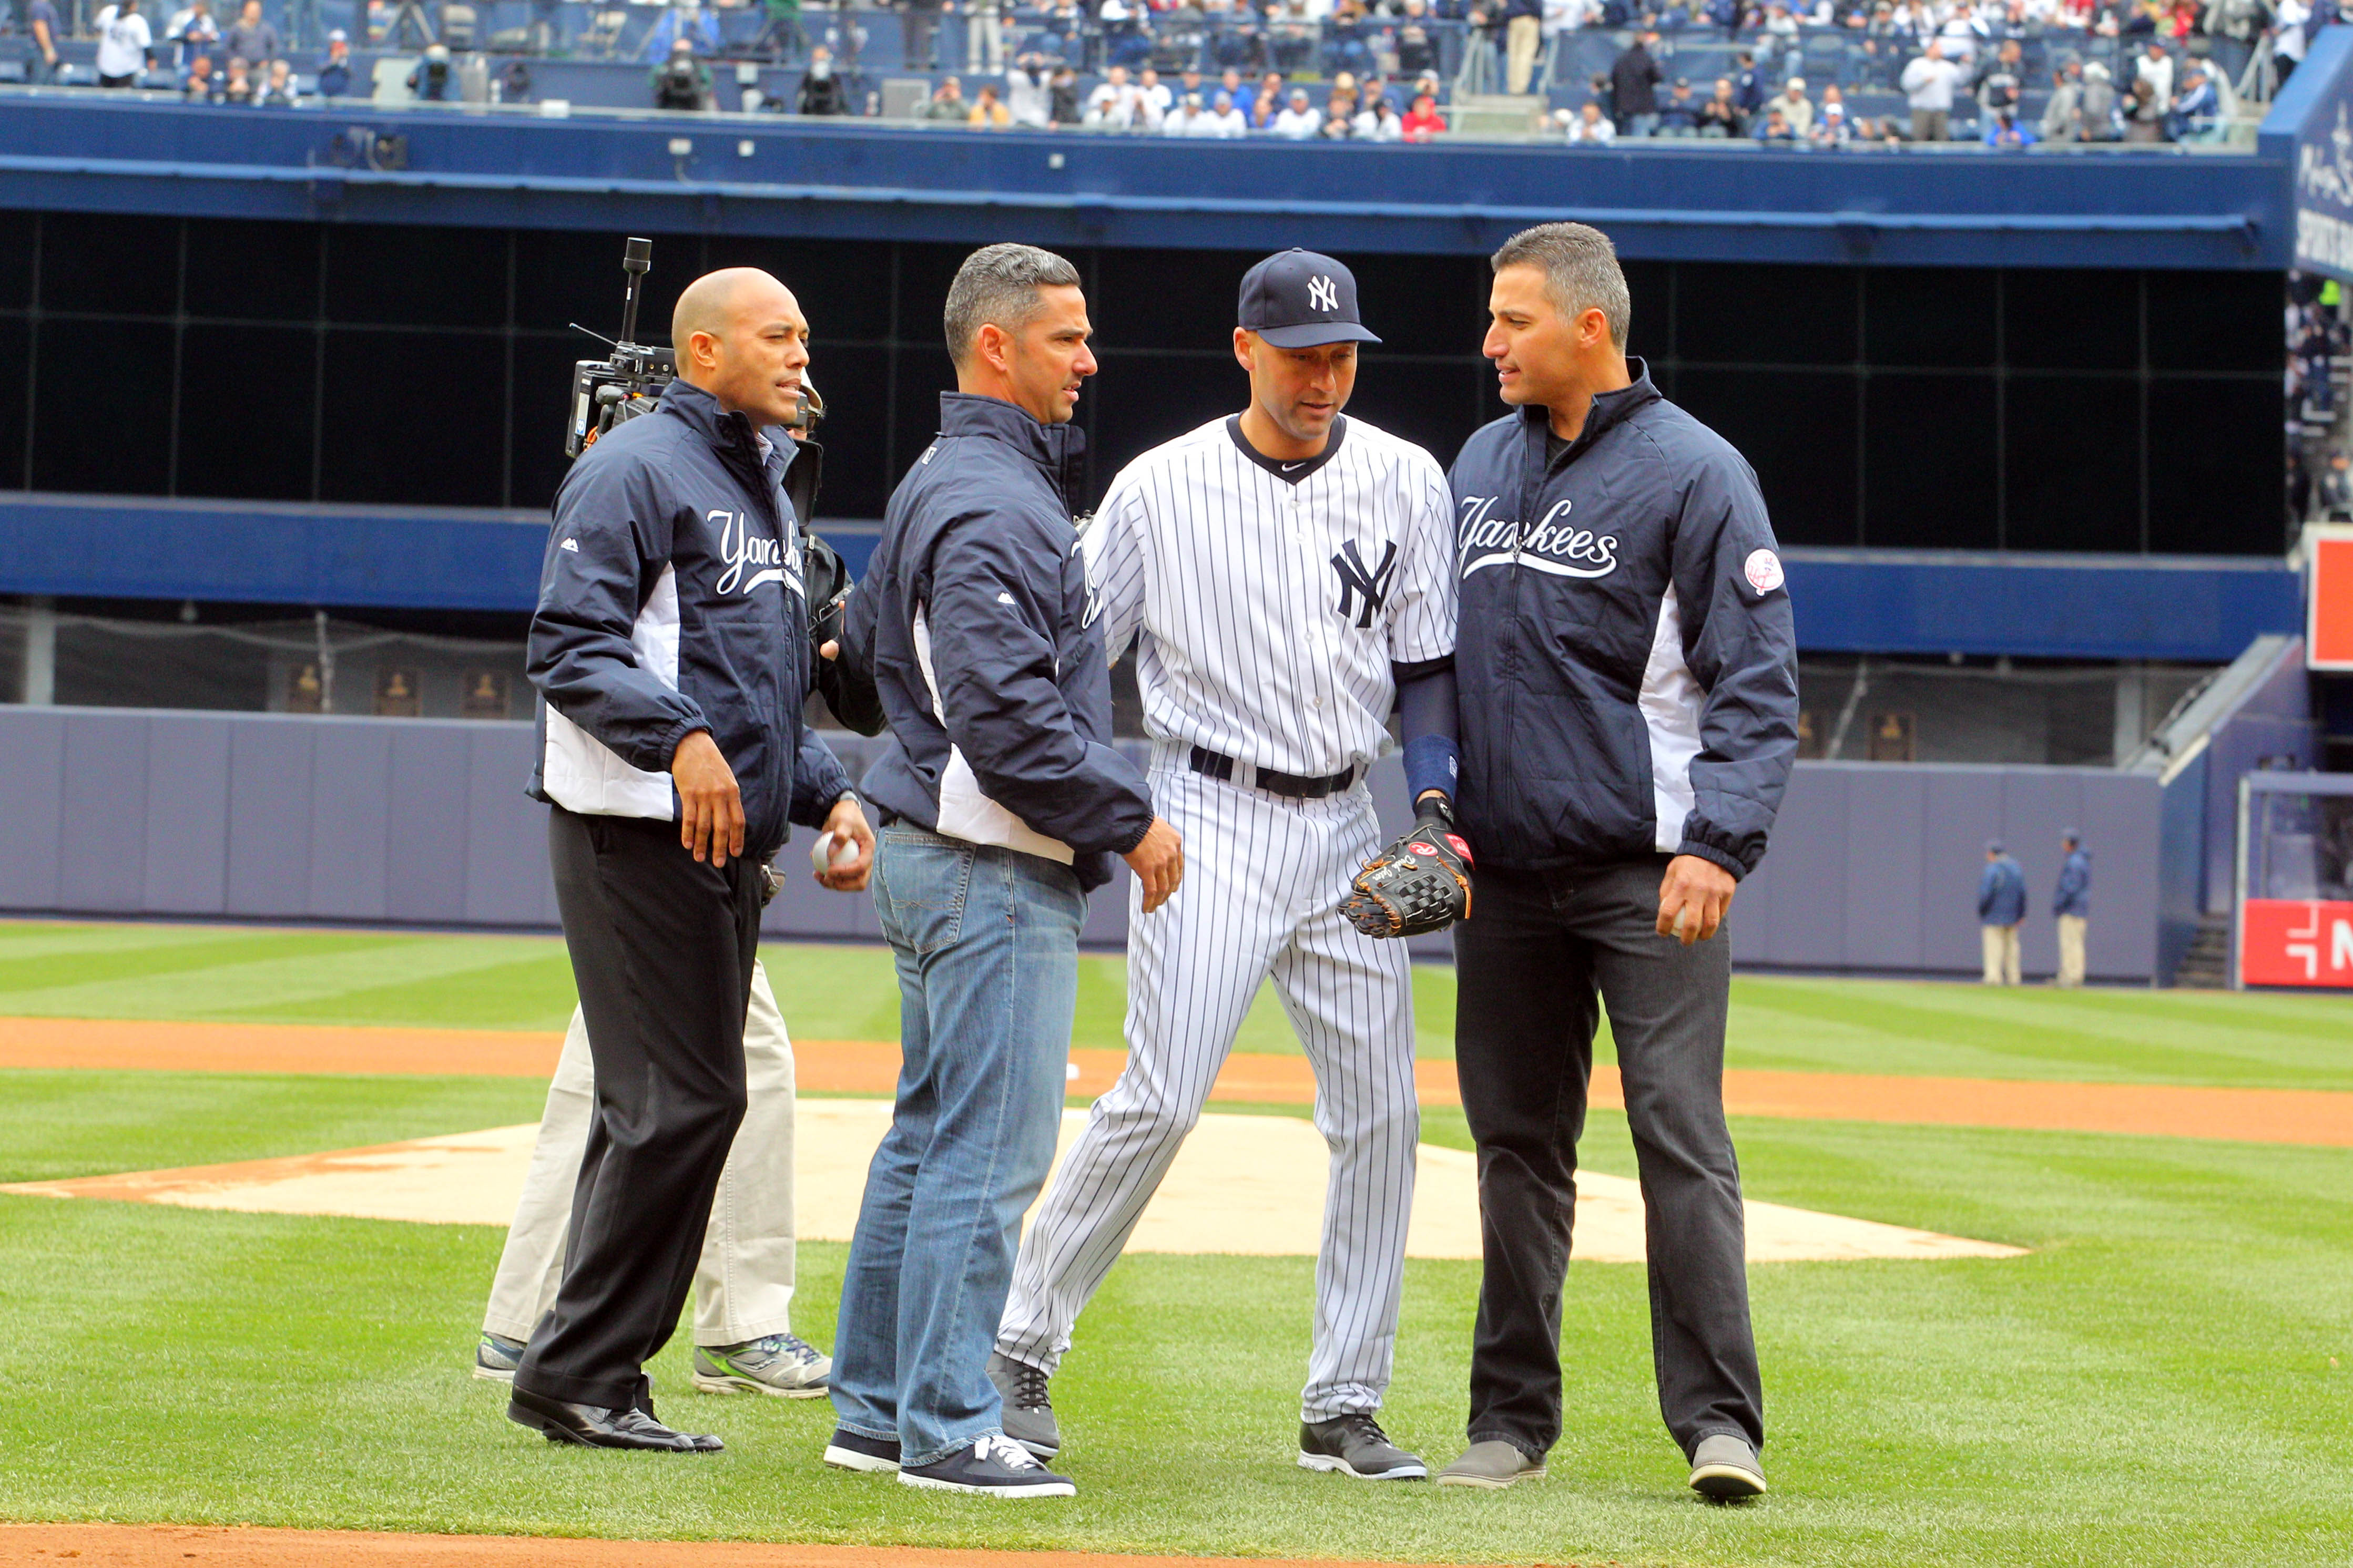 MLB: The New York Yankees are running out of numbers to issue